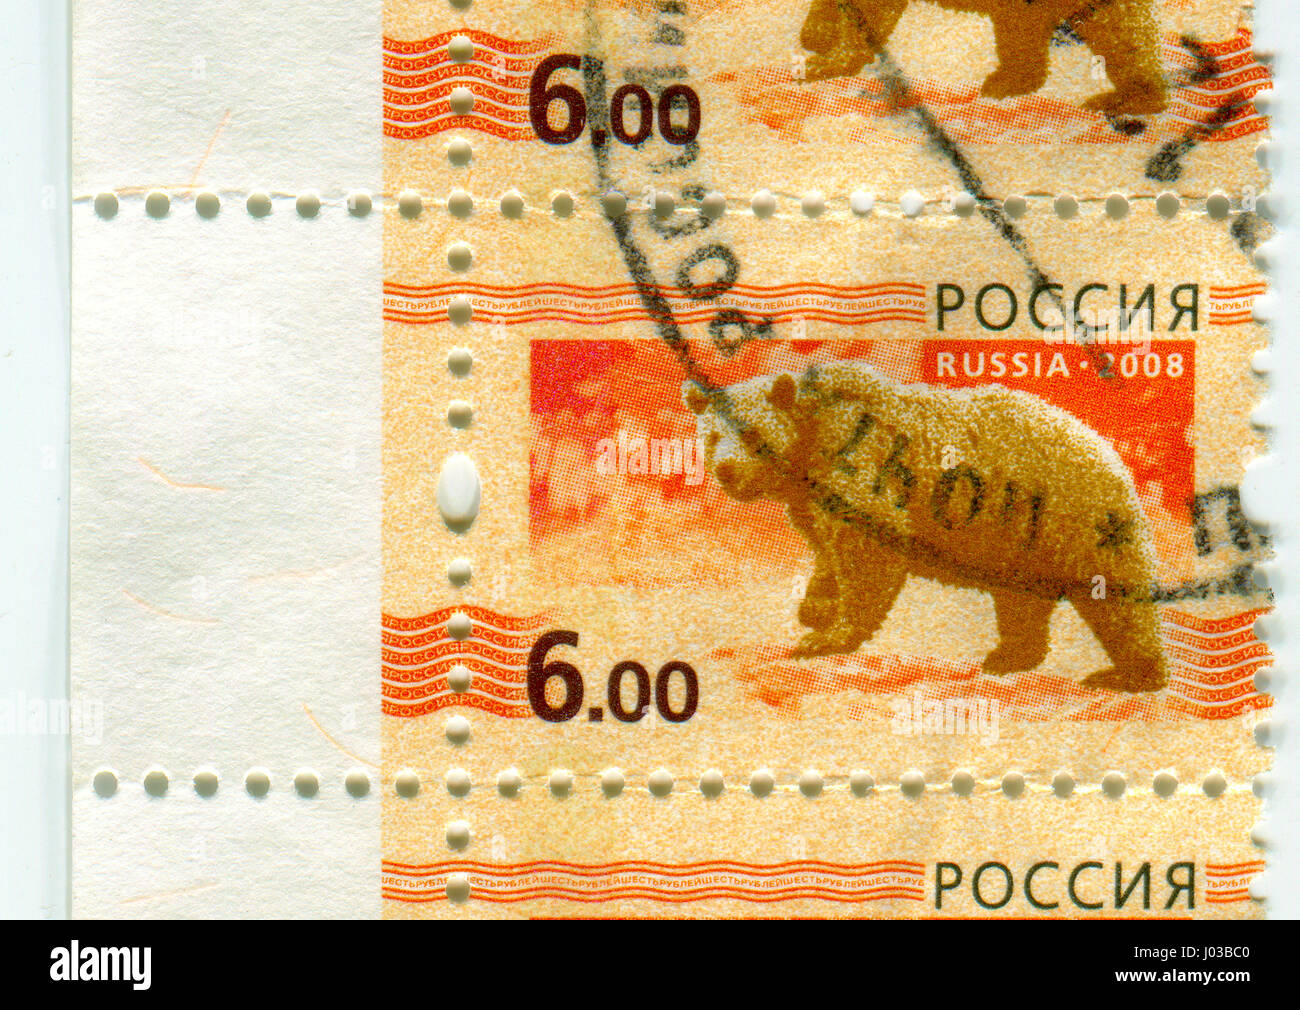 GOMEL, BELARUS, APRIL 7, 2017. Stamp printed in Russia shows image of  The Bears are carnivoran mammals of the family Ursidae, circa 2008. Stock Photo